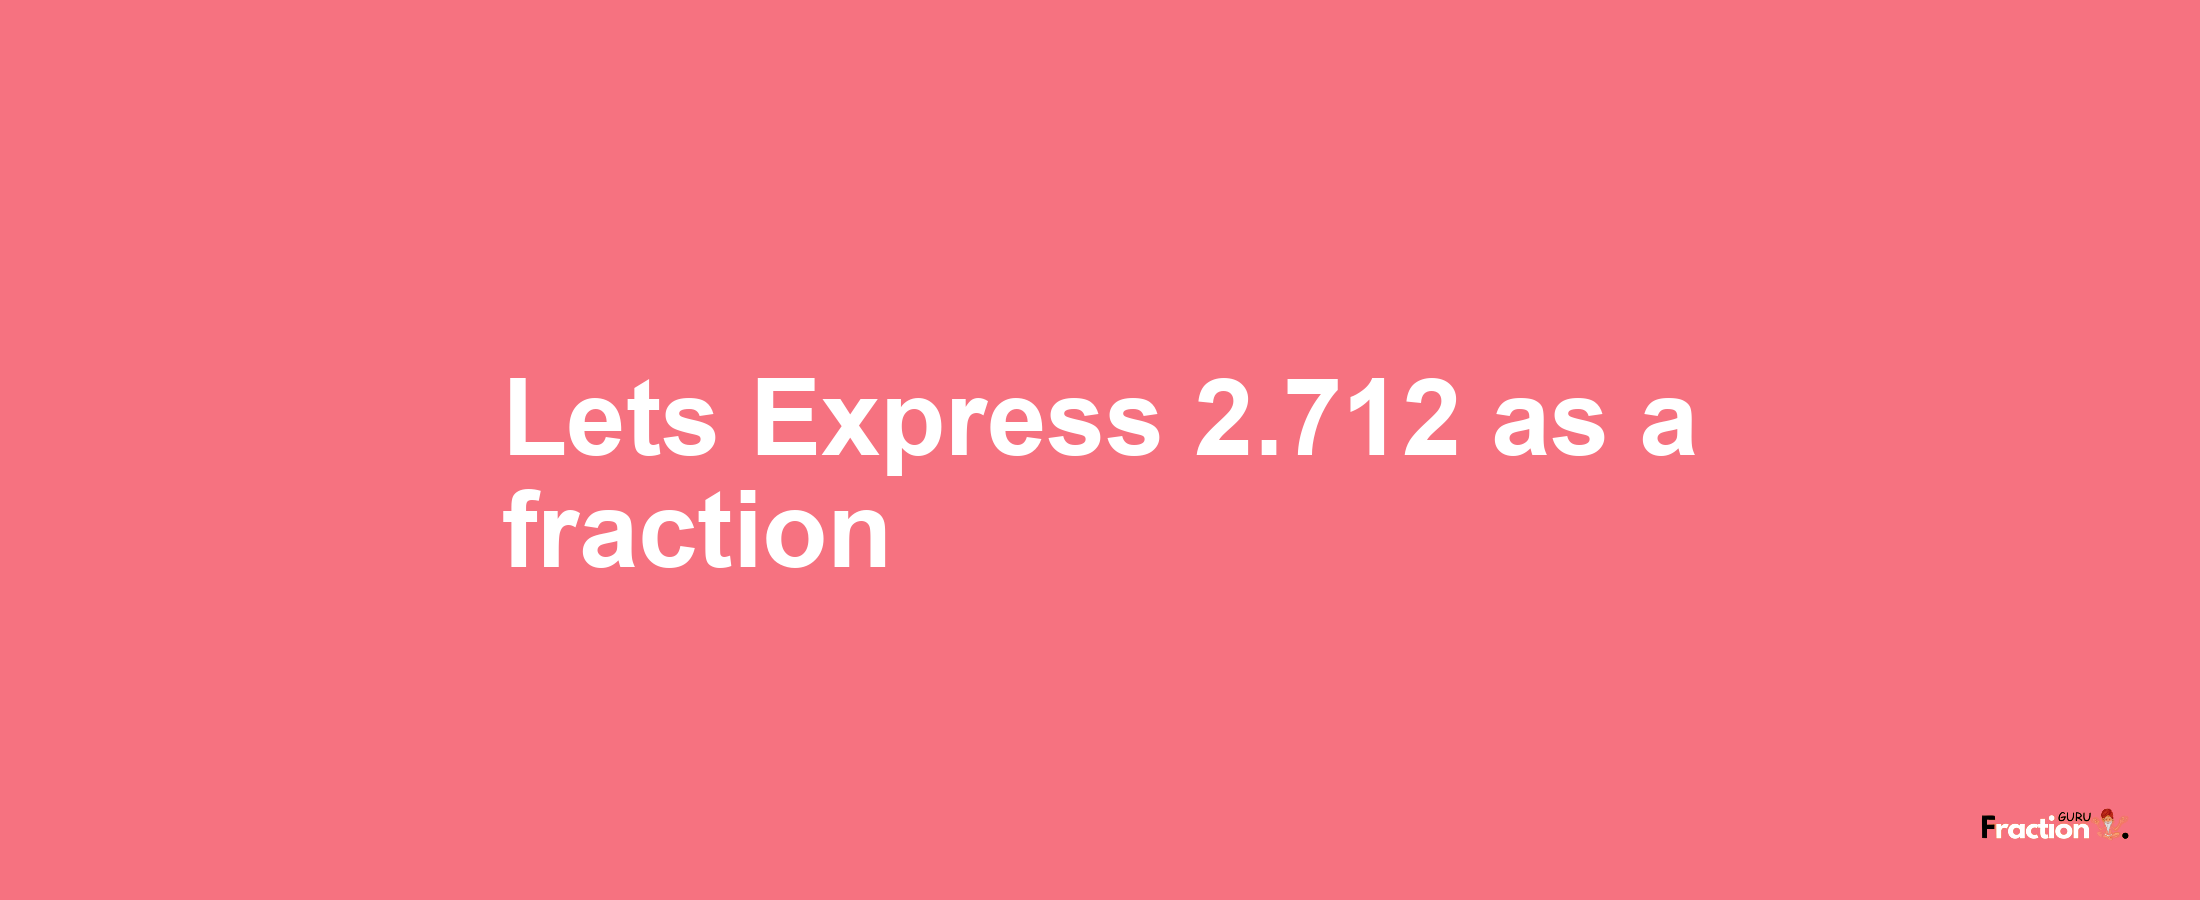 Lets Express 2.712 as afraction